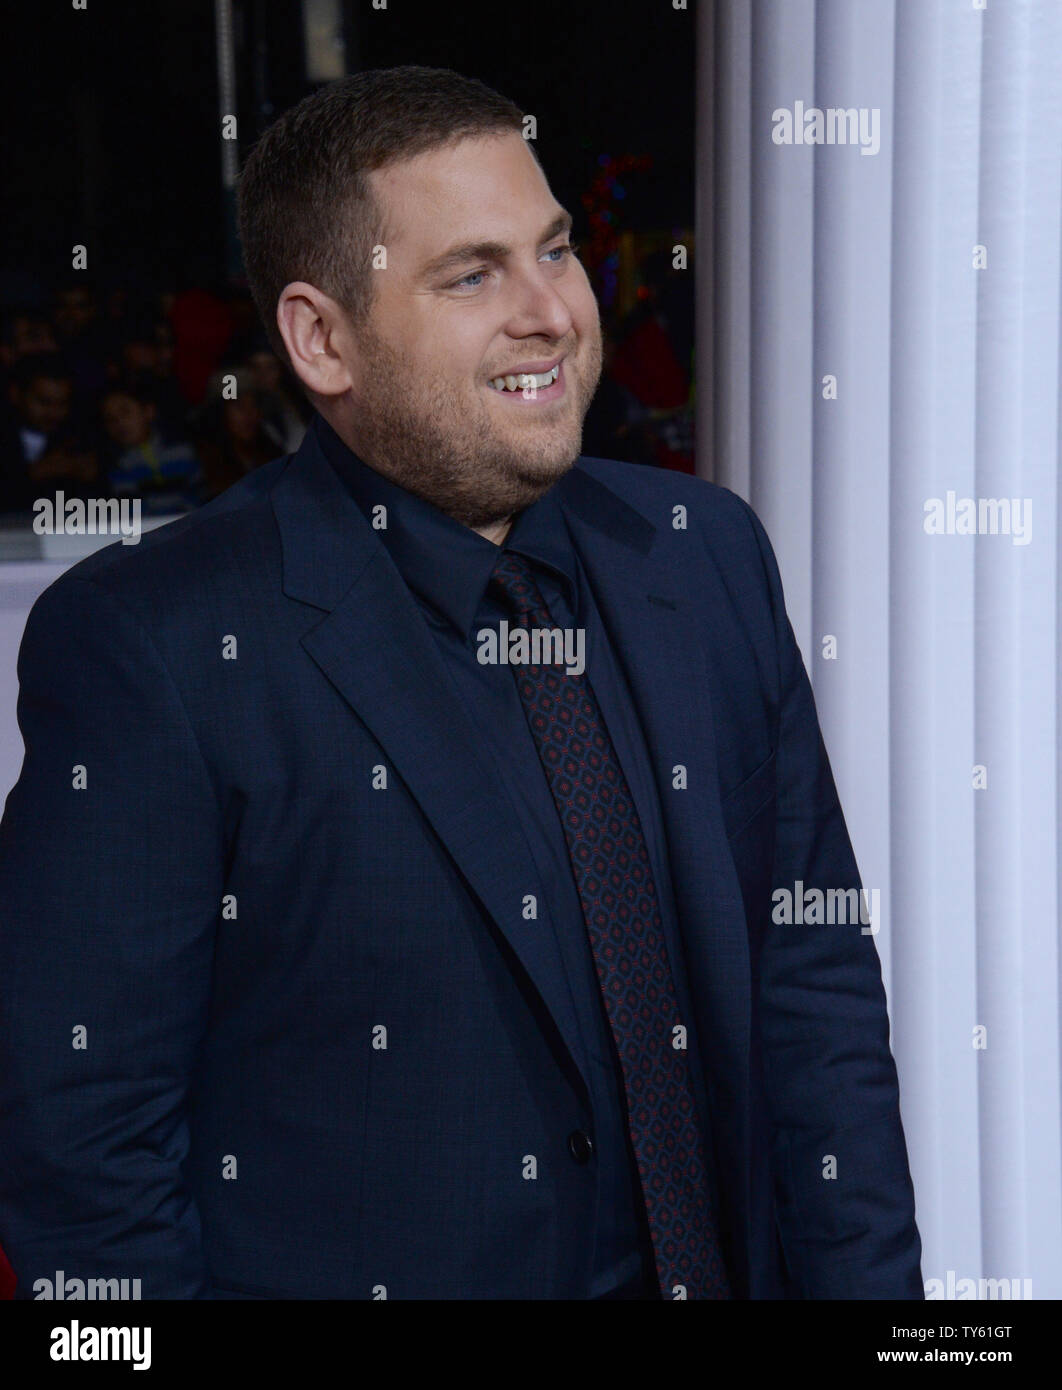 Cast member Jonah Hill attends the 'Hail, Caesar!' premiere at the Regency Village Theatre in the Westwood section of Los Angeles on February 1, 2016. Storyline: Hail Caesar! follows a day in the life of Eddie Mannix, a Hollywood fixer for Capital Pictures in the 1950s, who cleans up and solves problems for big names and stars in the industry. But when studio star Baird Whitlock disappears, Mannix has to deal with more than just the fix.   Photo by Jim Ruymen/UPI Stock Photo